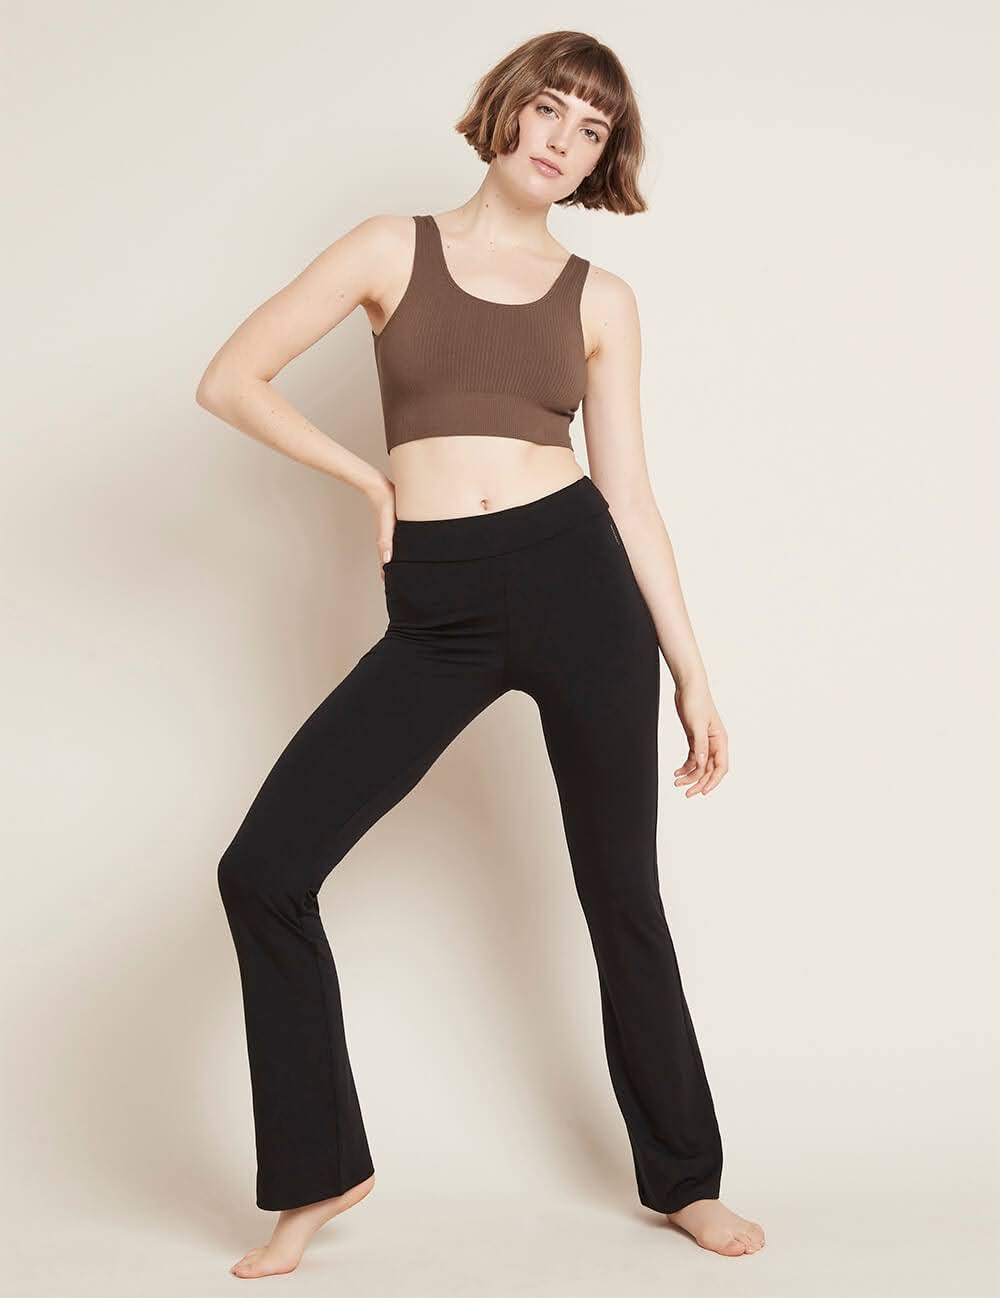 A woman wearing a brown sports bra and black flared bamboo leggings from Boody